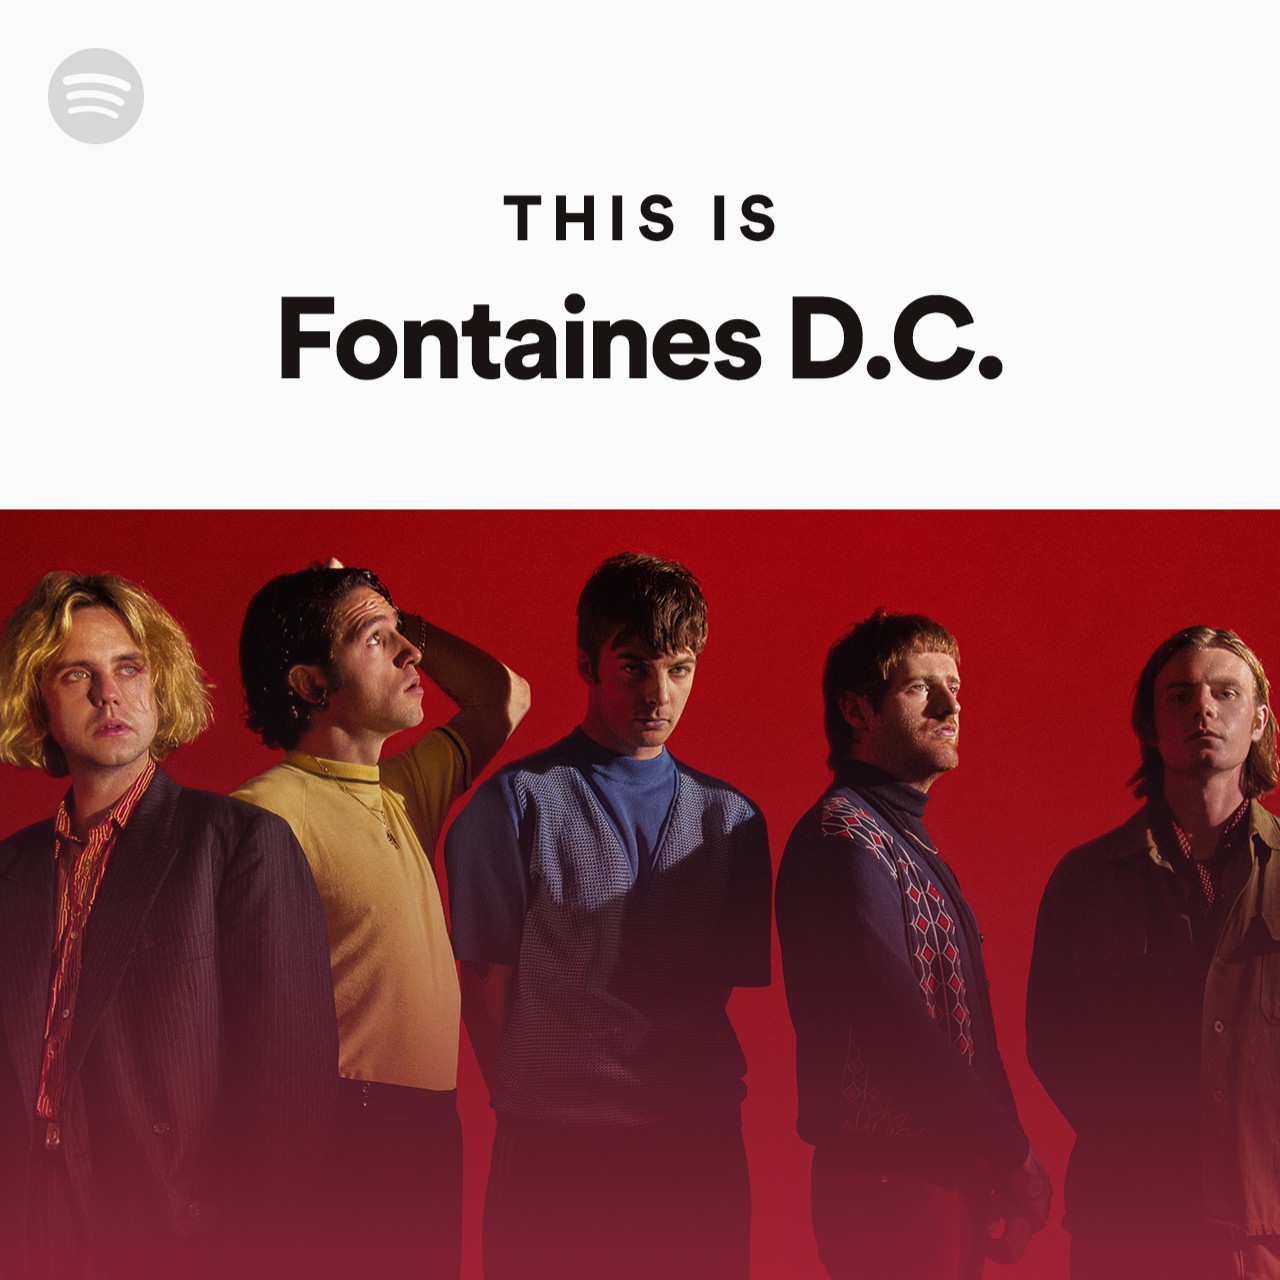 This Is Fontaines D.C.